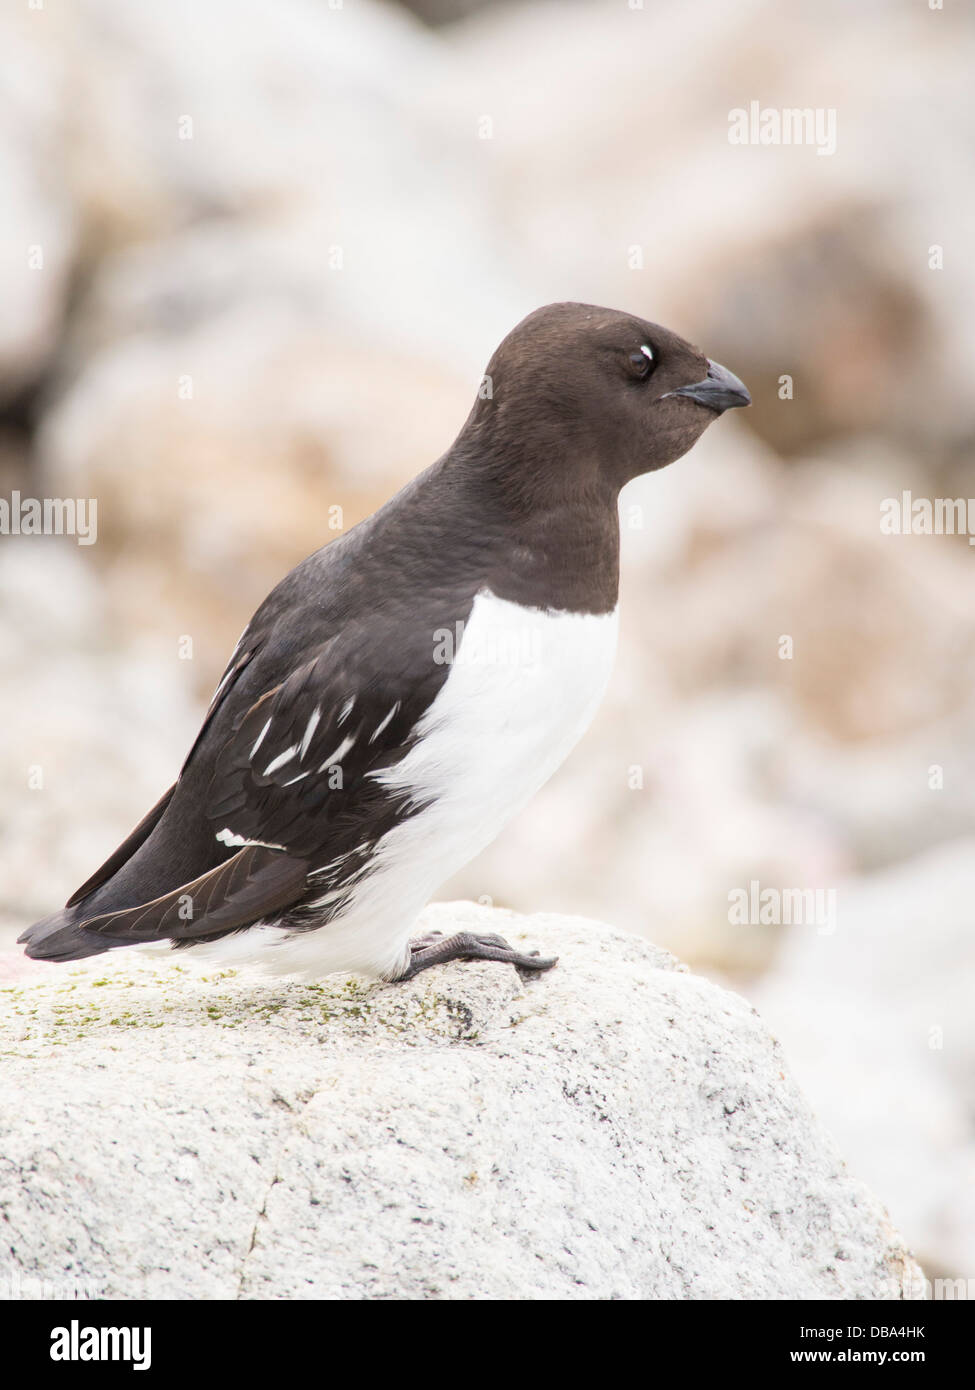 A Little Auk or Dovekie (Alle alle) at a nesting colony at Sallyhamna (79°51’n 11°23’e) on the north coast of Spitsbergen Stock Photo